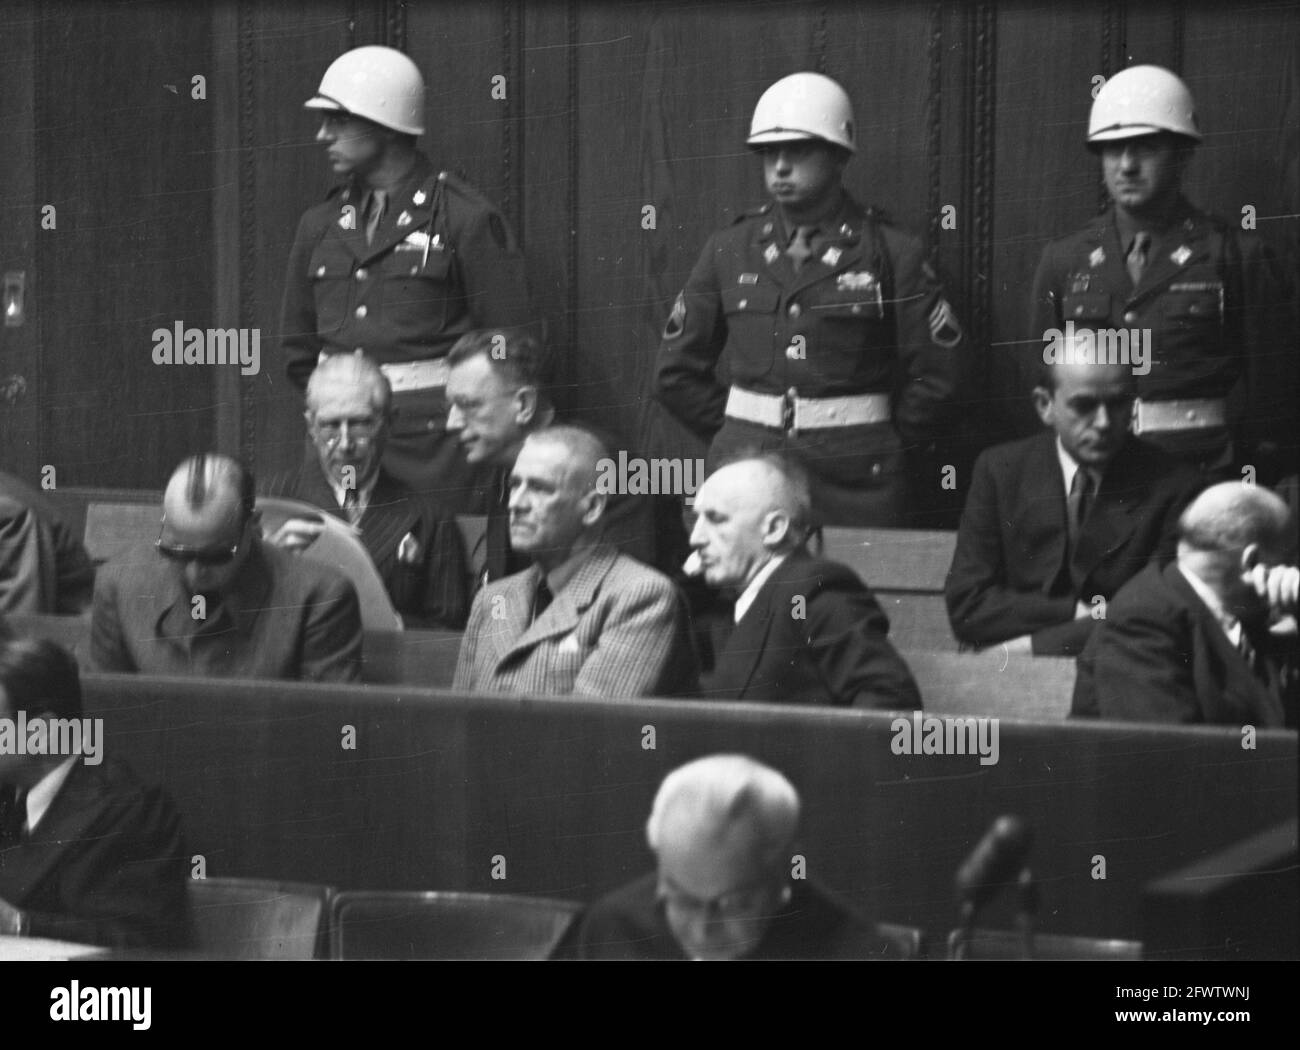 Nuremberg Trial. Back row Von Papen, Seyss Inquart, Speer, in front row Franck, Frick and Streicher, December 4, 1945, war criminals, trials, justice, second world war, The Netherlands, 20th century press agency photo, news to remember, documentary, historic photography 1945-1990, visual stories, human history of the Twentieth Century, capturing moments in time Stock Photo